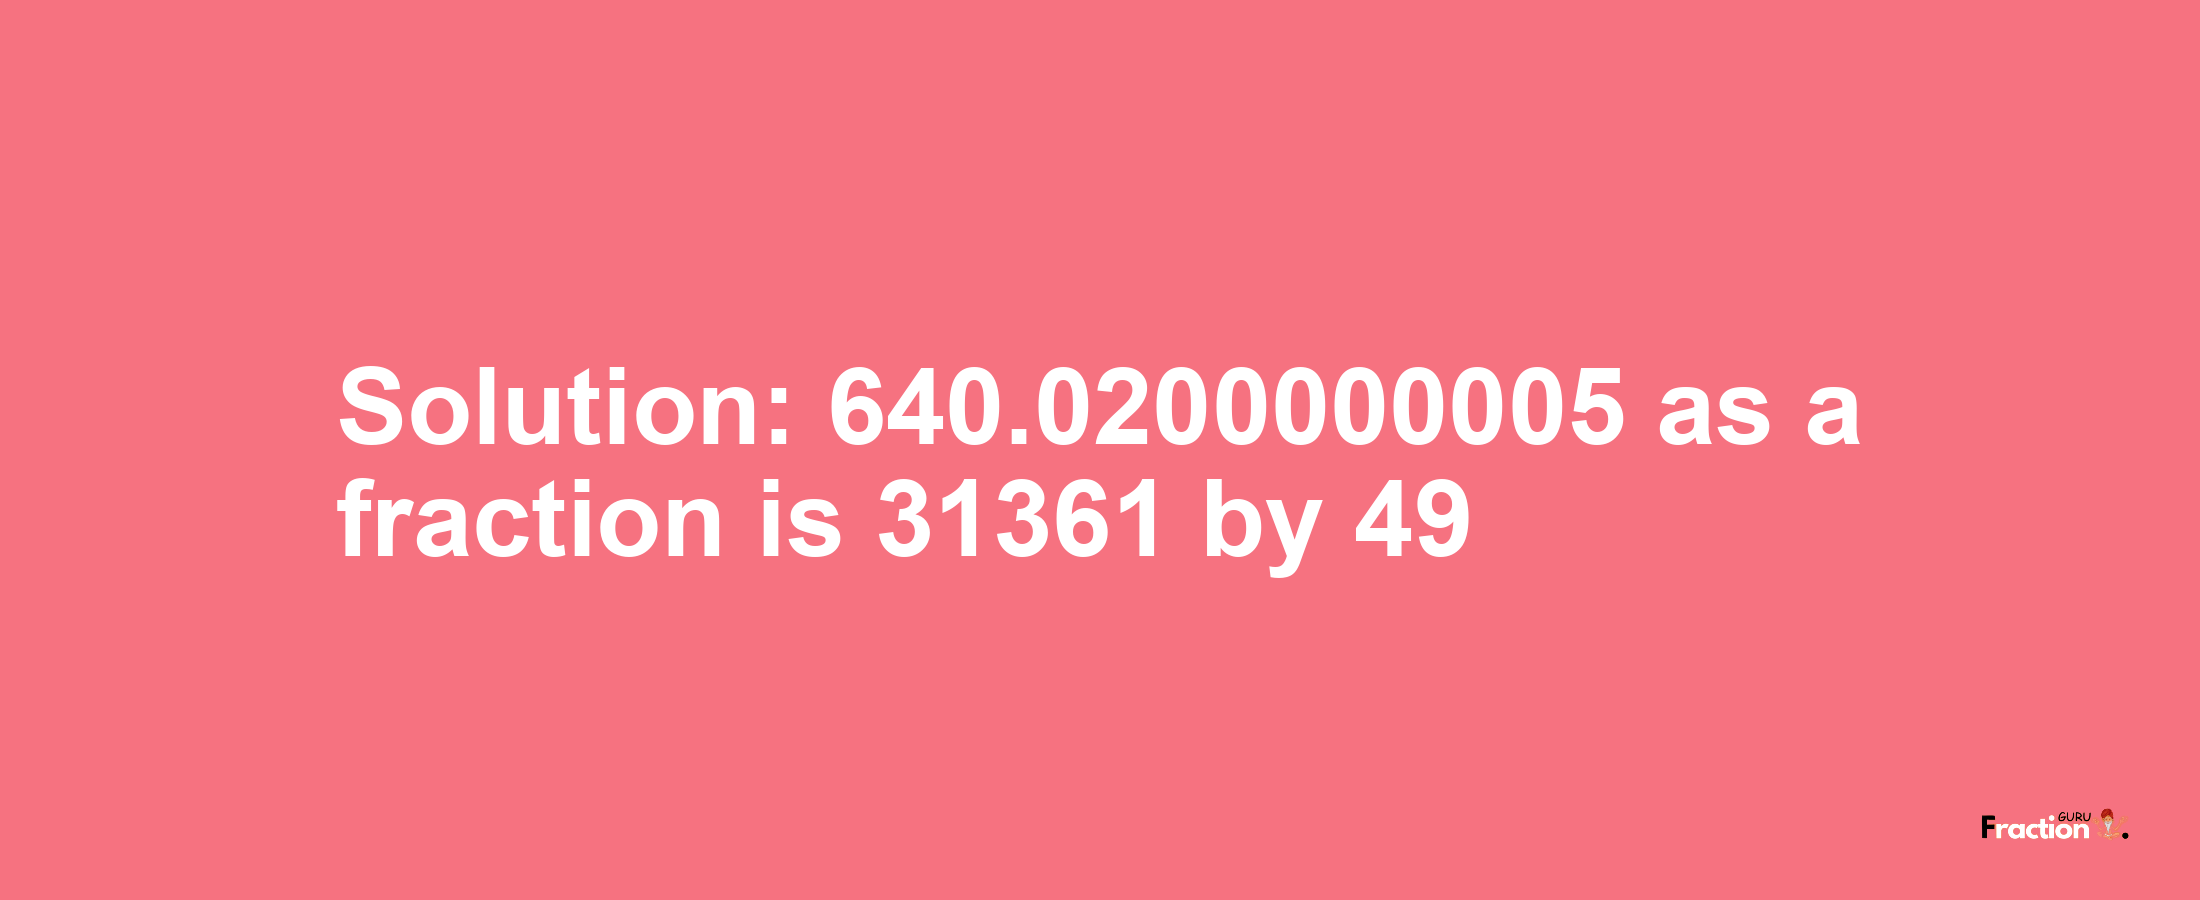 Solution:640.0200000005 as a fraction is 31361/49